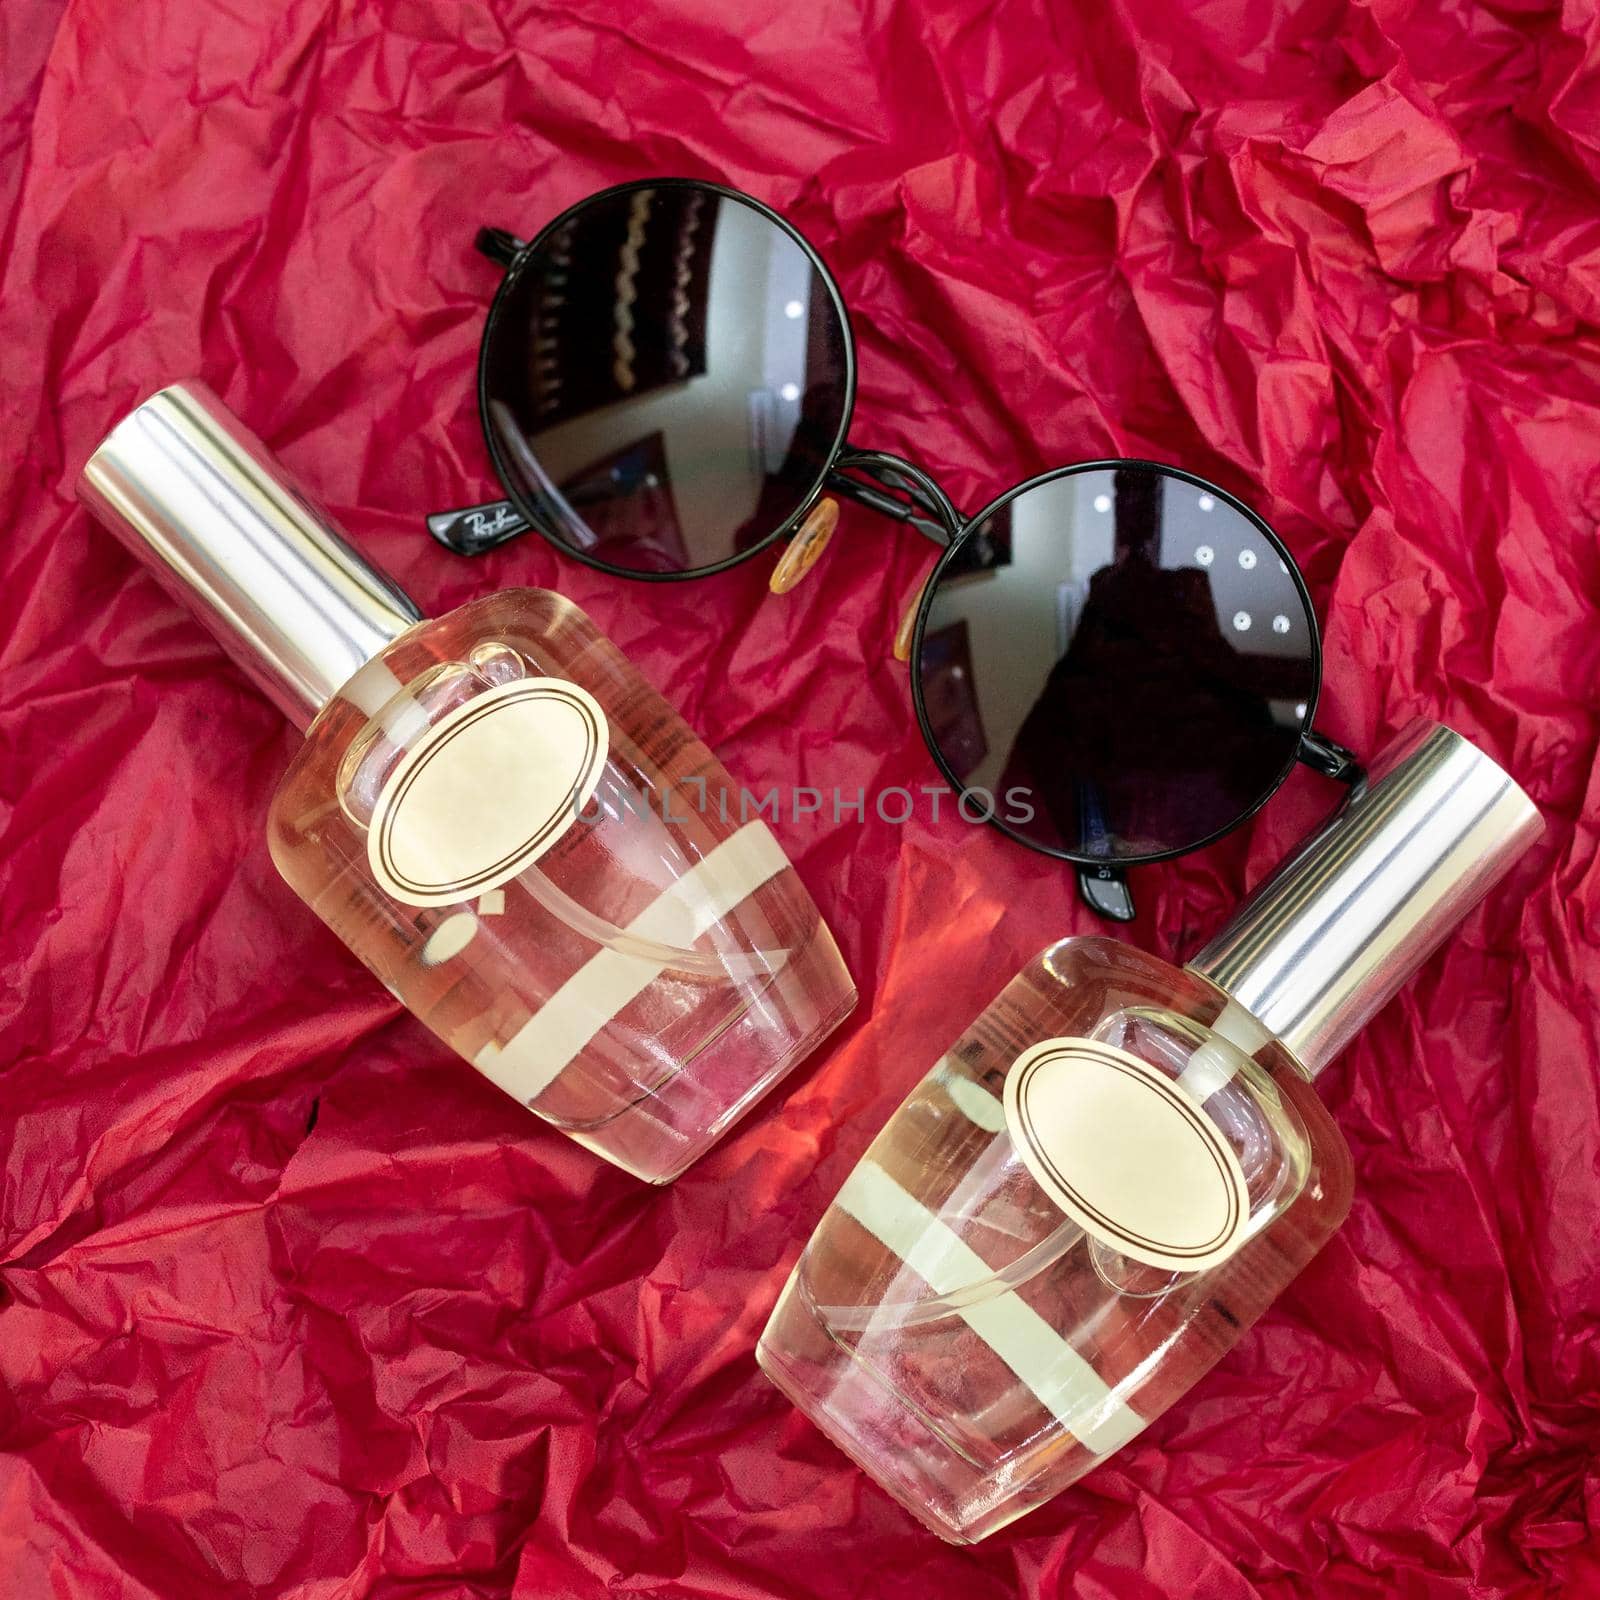 Perfume flacon with sunglass on the red cellophane